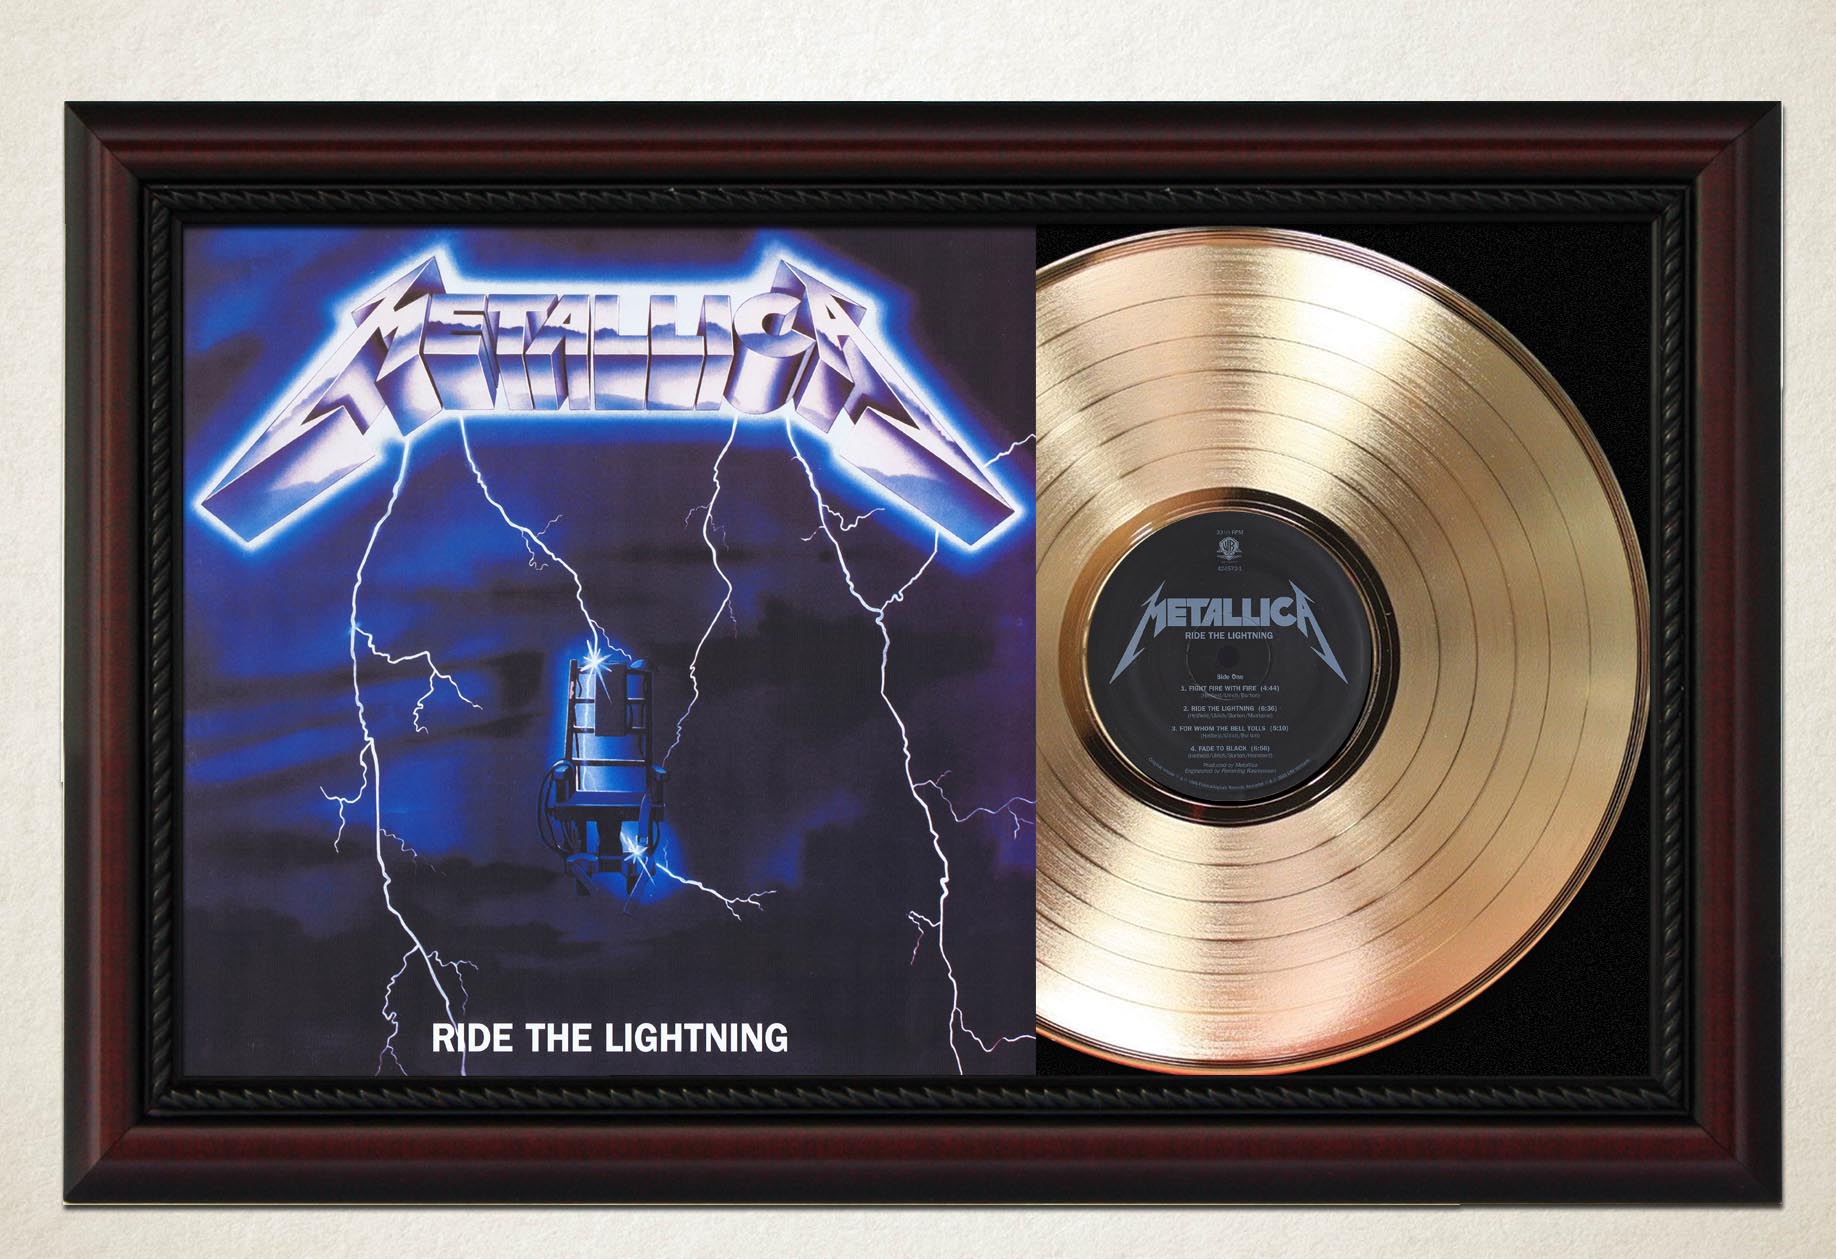 Metallica - Ride the Lightning Doubt Cherry Wood Gold LP Record Sleeve  Display M4 - Gold Record Outlet Album and Disc Collectible Memorabilia